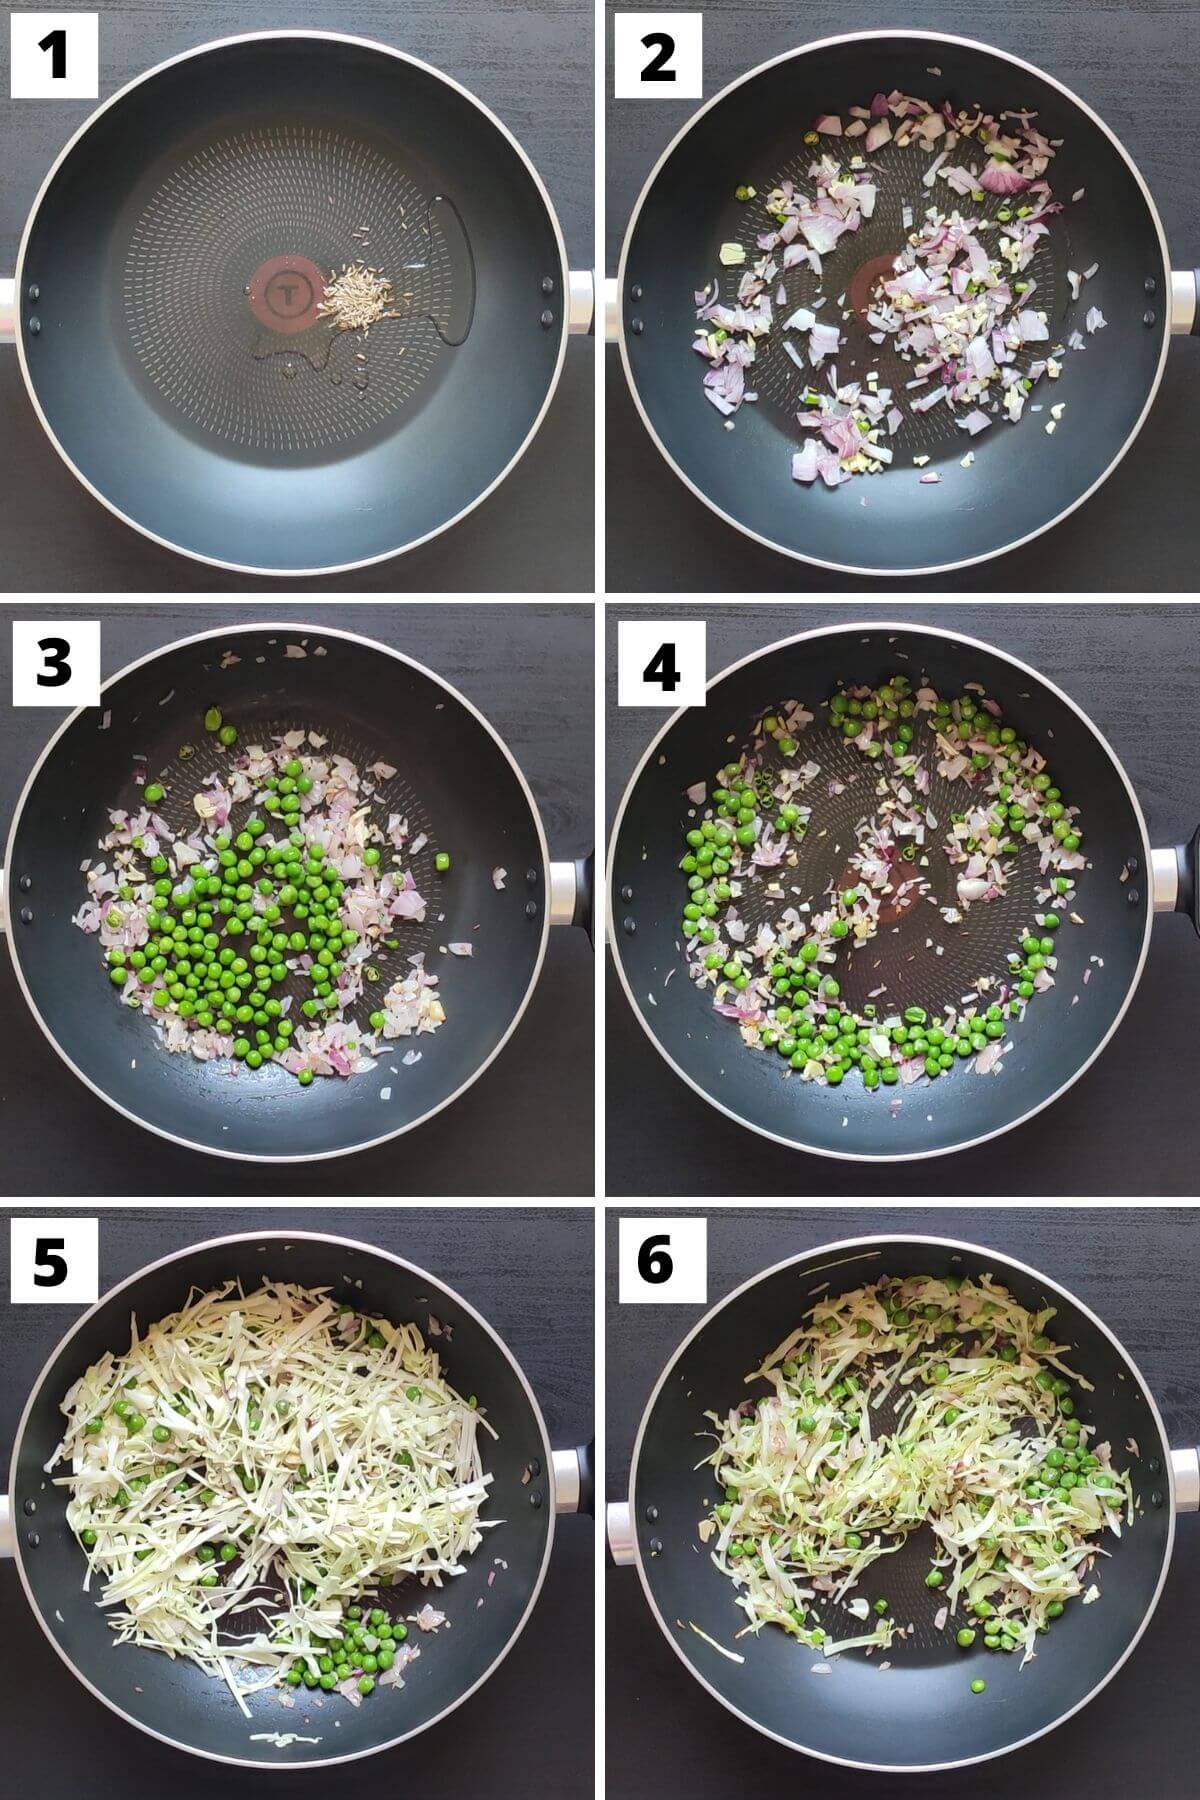 Steps to make cabbage fried rice